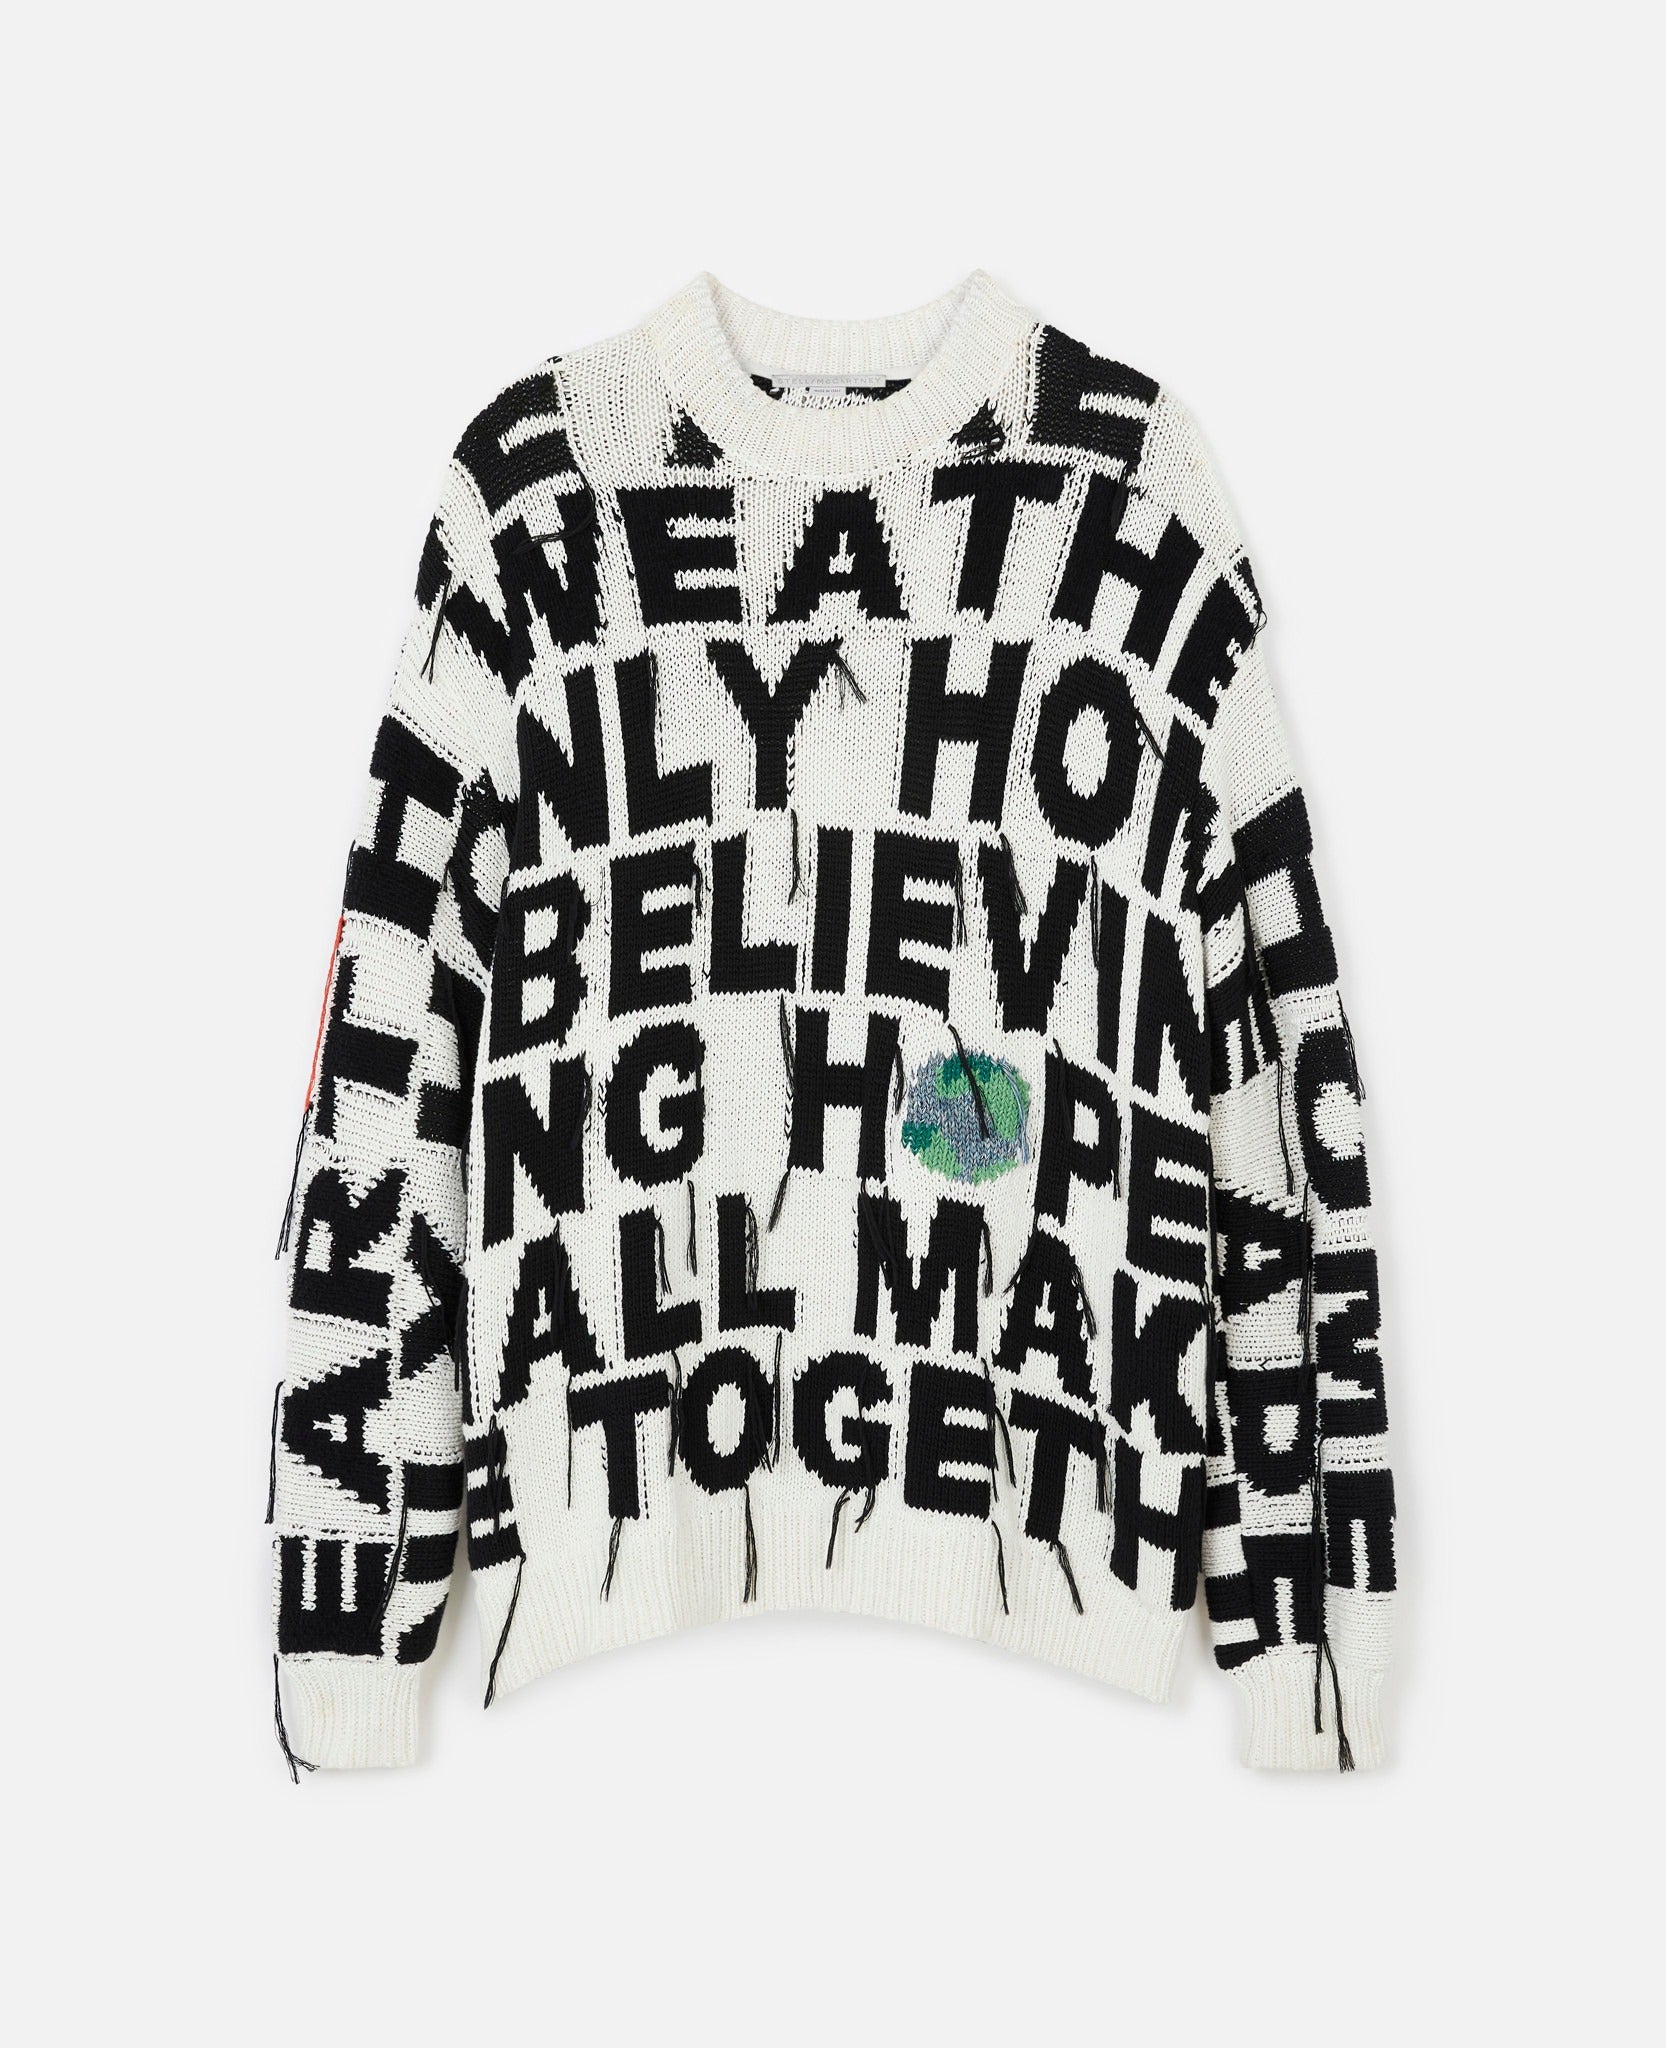 Stella McCartney + “We are the weather” Jumper